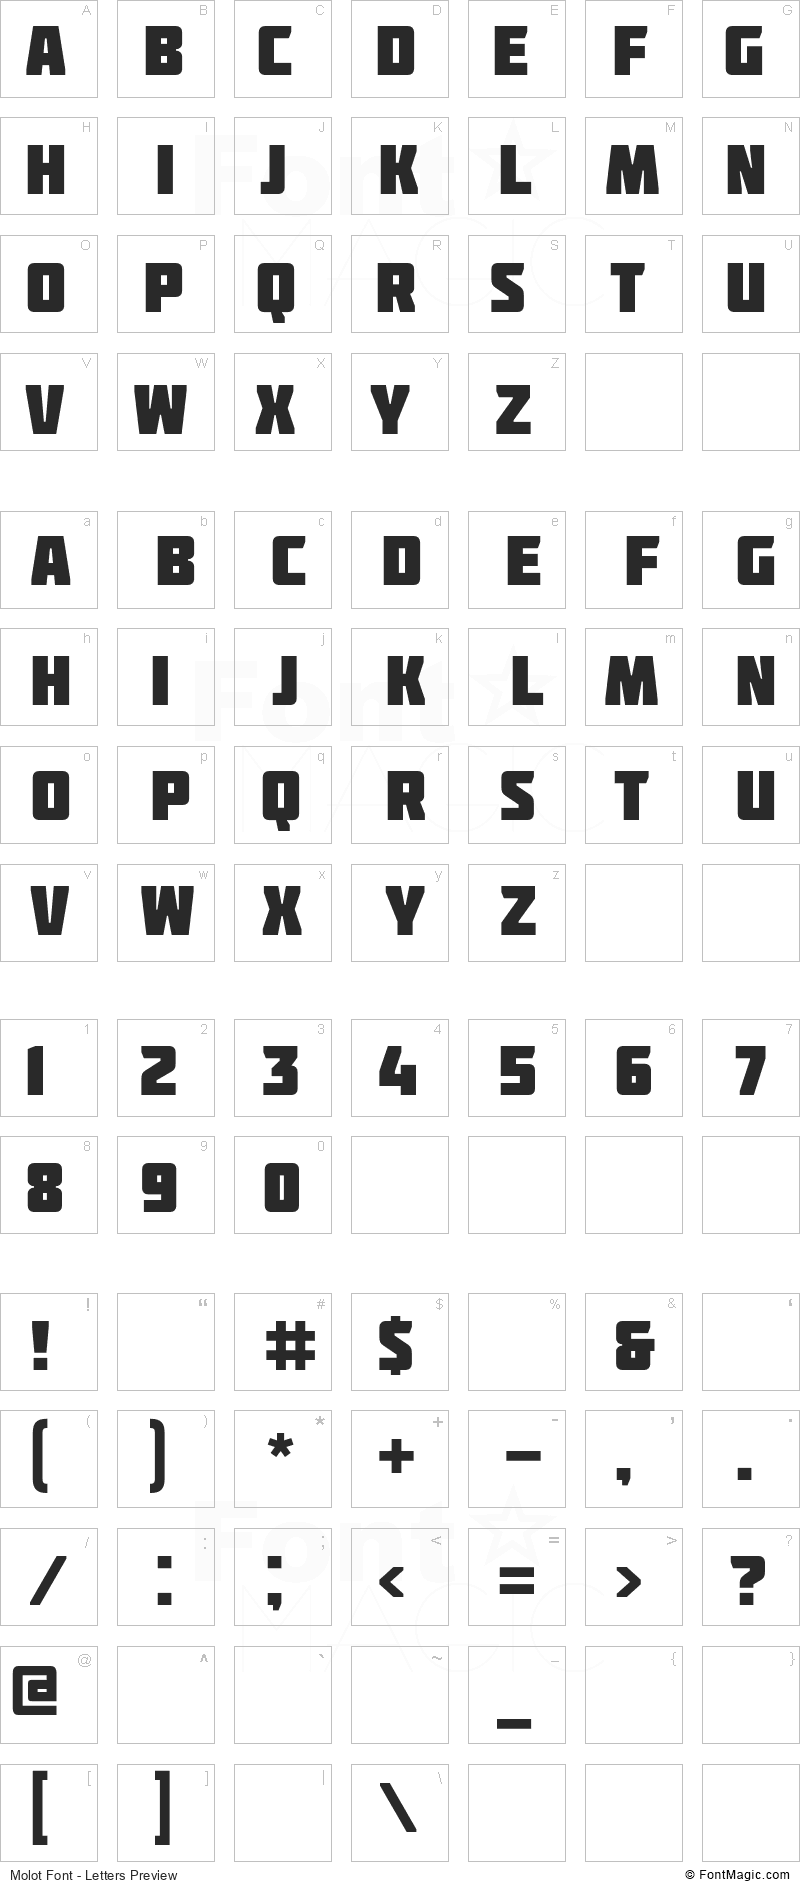 Molot Font - All Latters Preview Chart